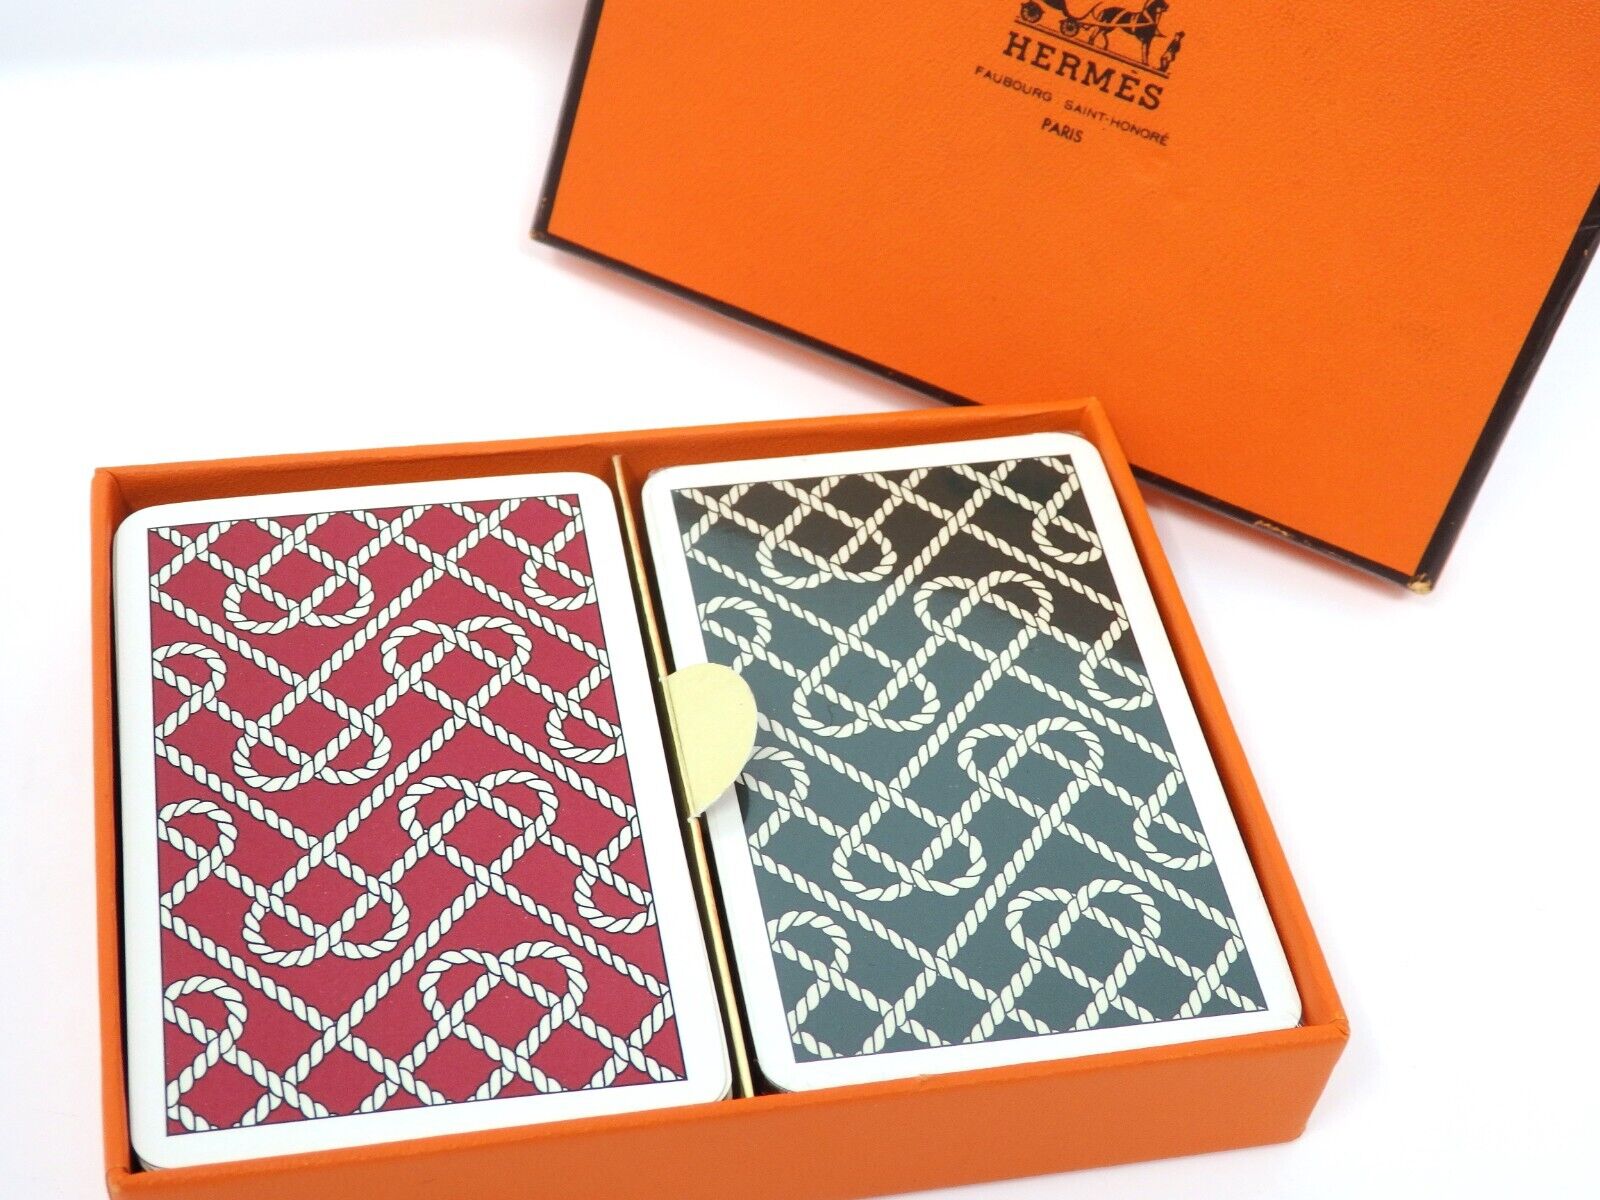 HERMES 2 Deck of Playing Cards Trump Game Authentic Heart  Rope Design Red Green